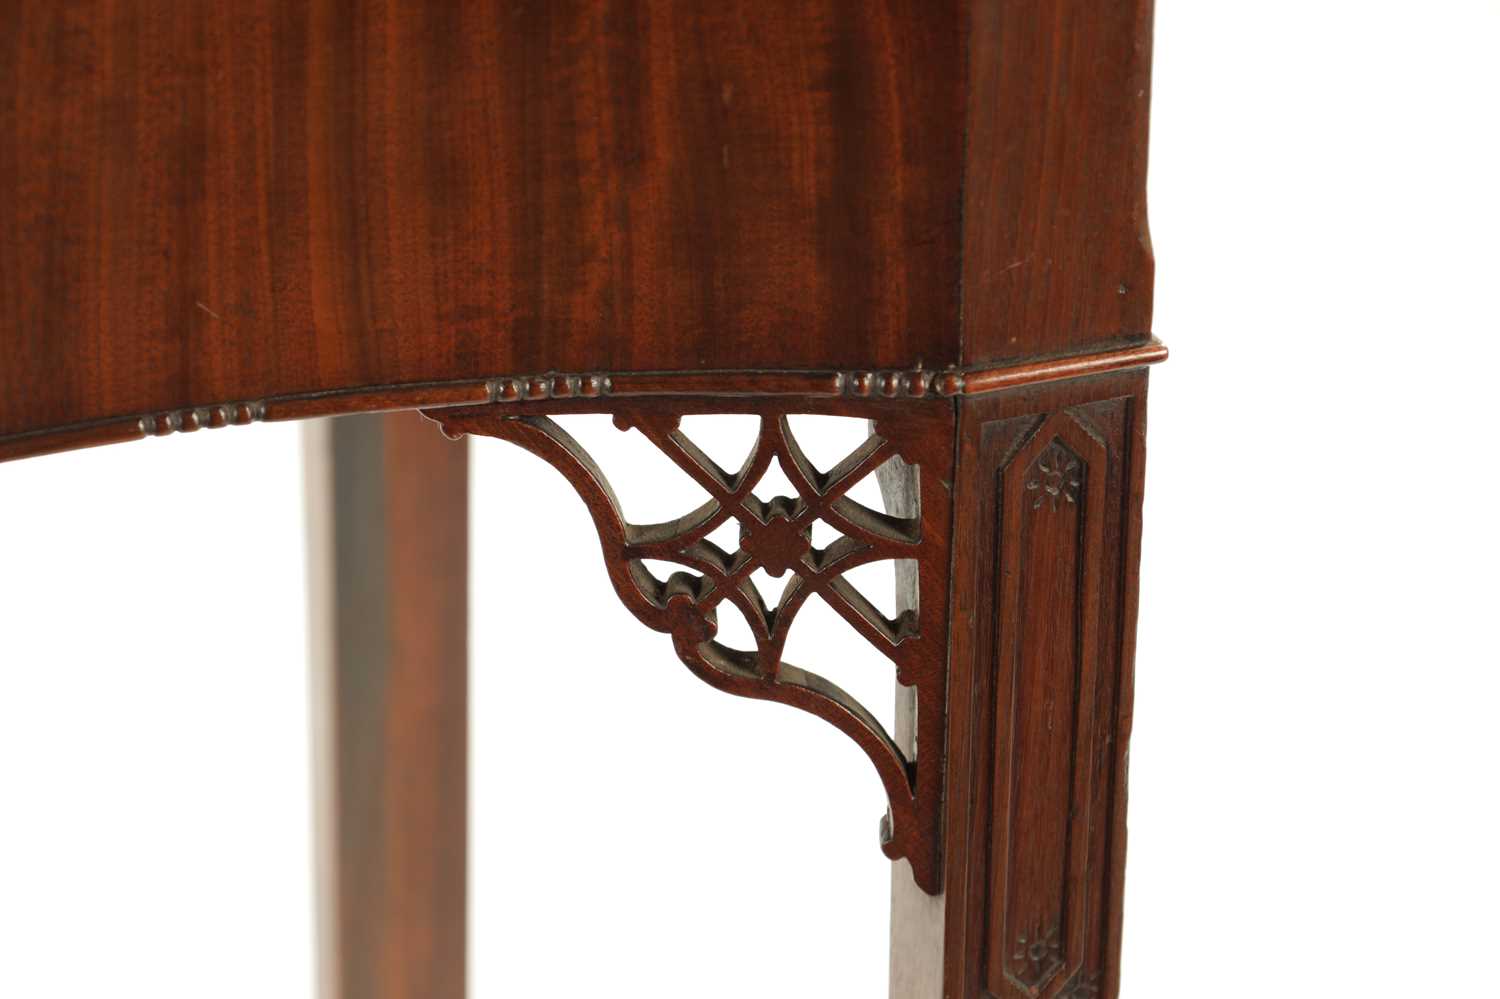 A FINE OVERSIZED GEROGE III SERPENTINE MAHOGANY TEA-TABLE IN THE MANNER OF THOMAS CHIPPENDALE - Image 3 of 8